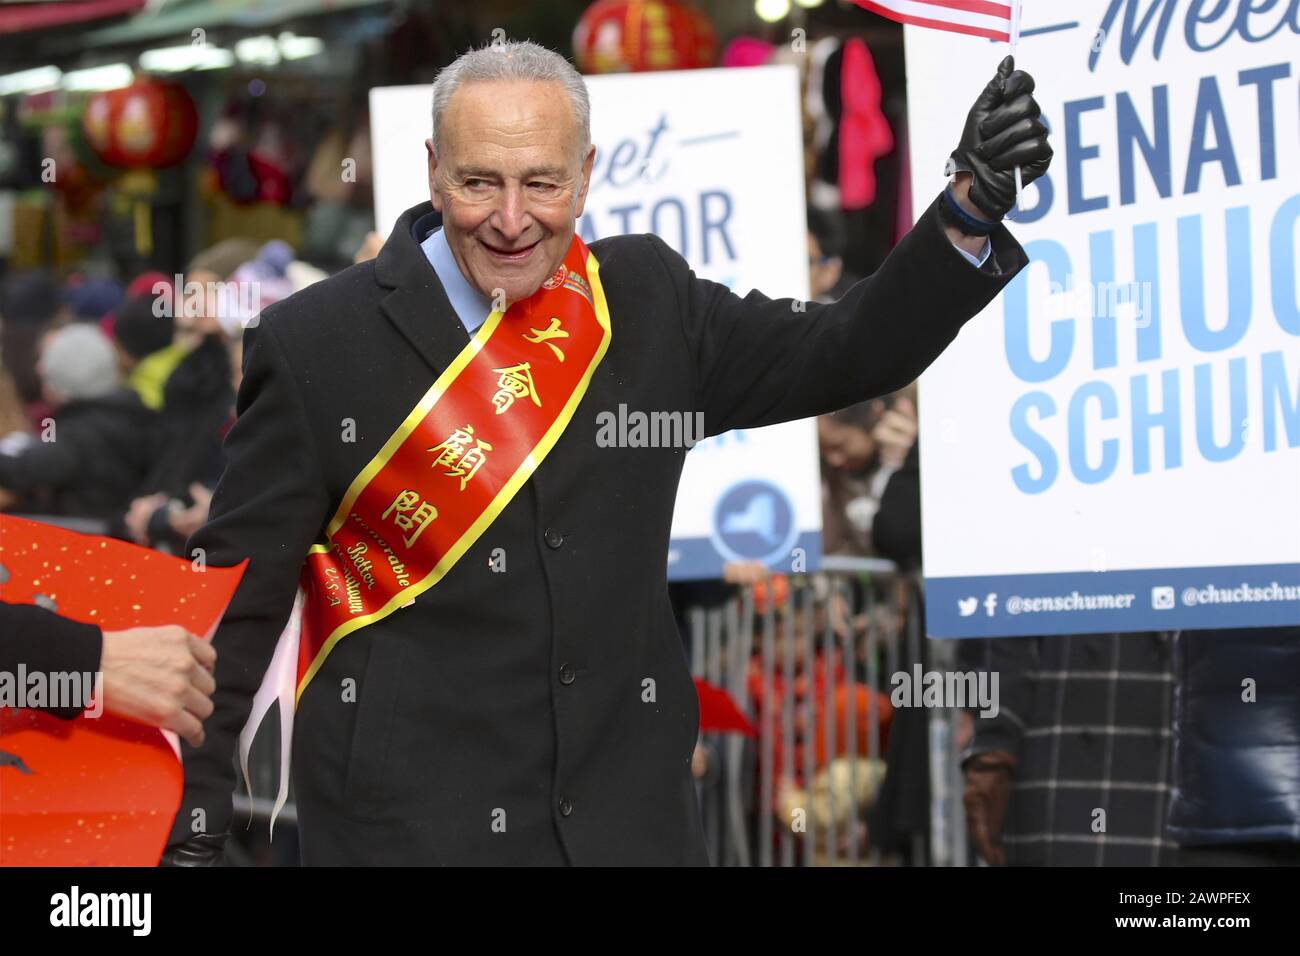 New York, New York, USA. 9th Feb, 2020. SENATOR CHARLES SCHUMER of New York participated in the annual Lunar New Year parade today in New York City's Chinatown. Credit: Staton Rabin/ZUMA Wire/Alamy Live News Stock Photo